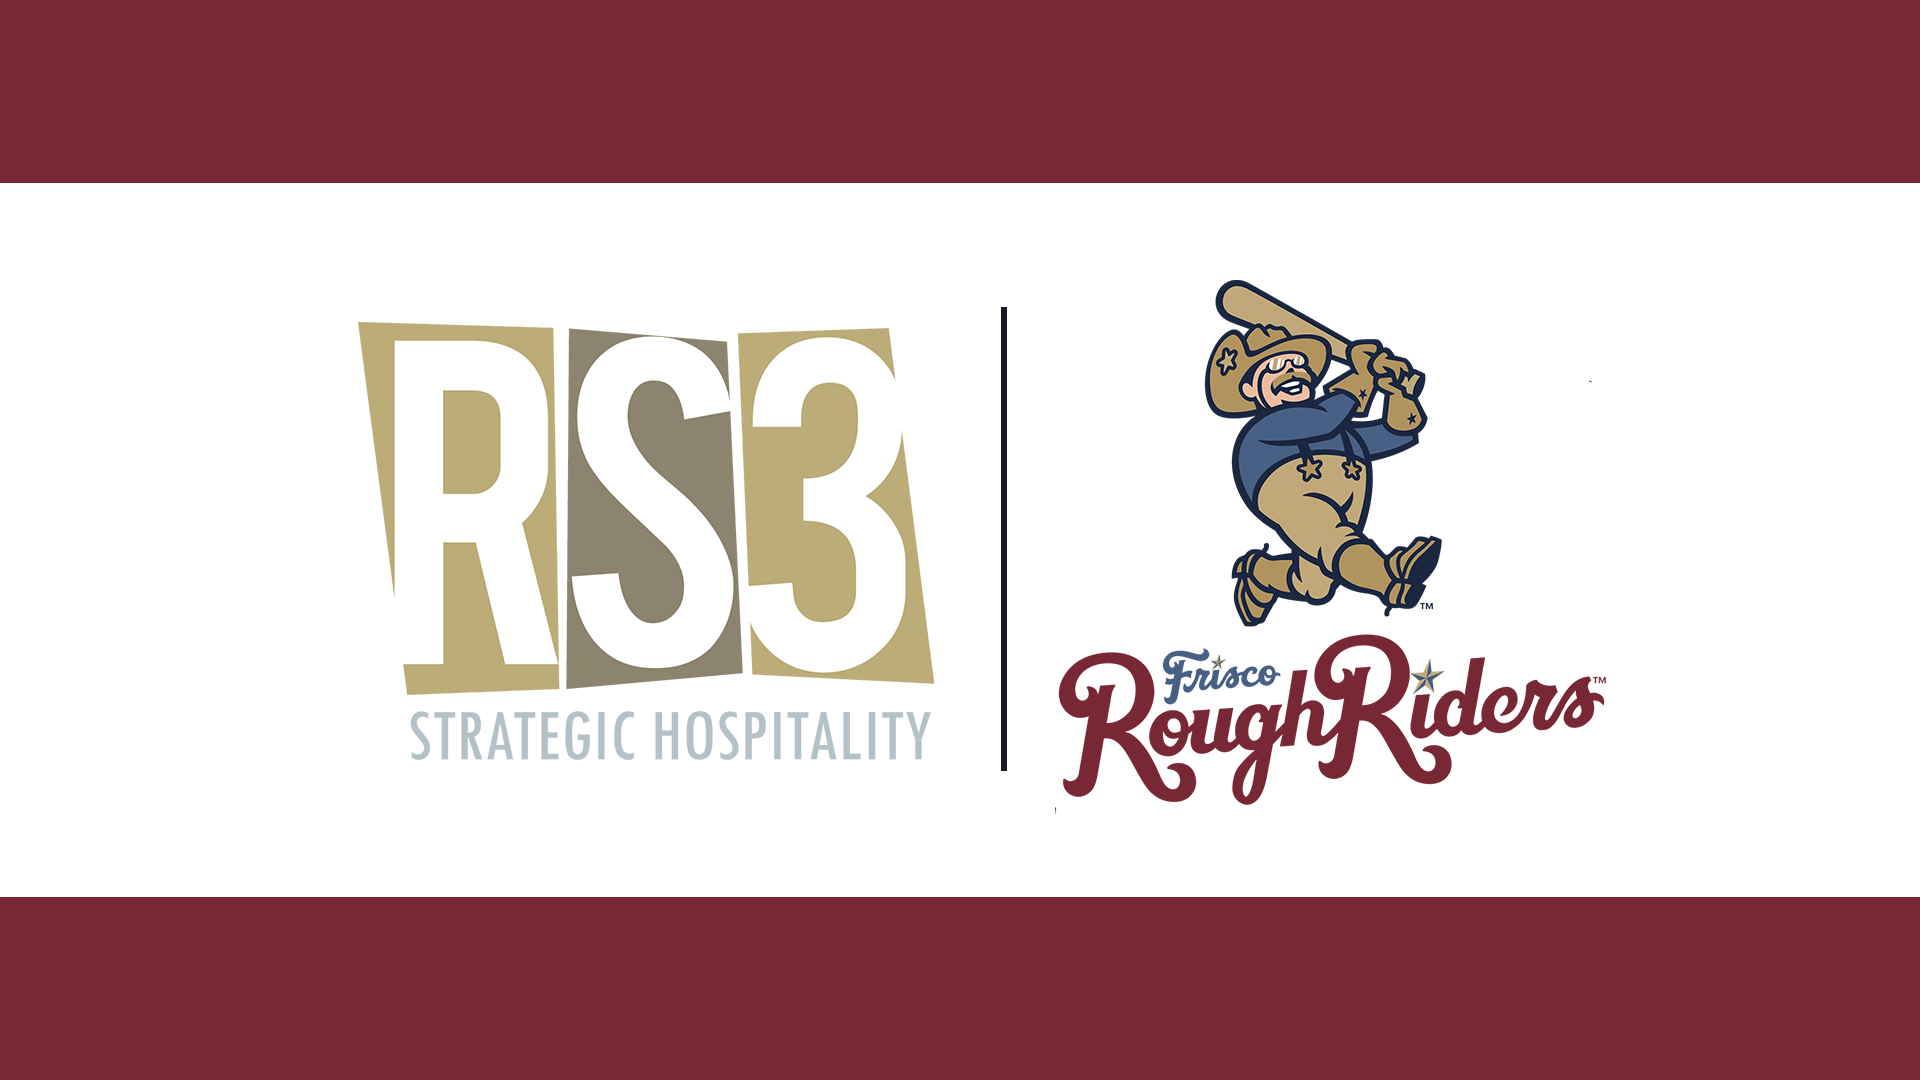 RS3 Strategic Hospitality Partners with Frisco RoughRiders